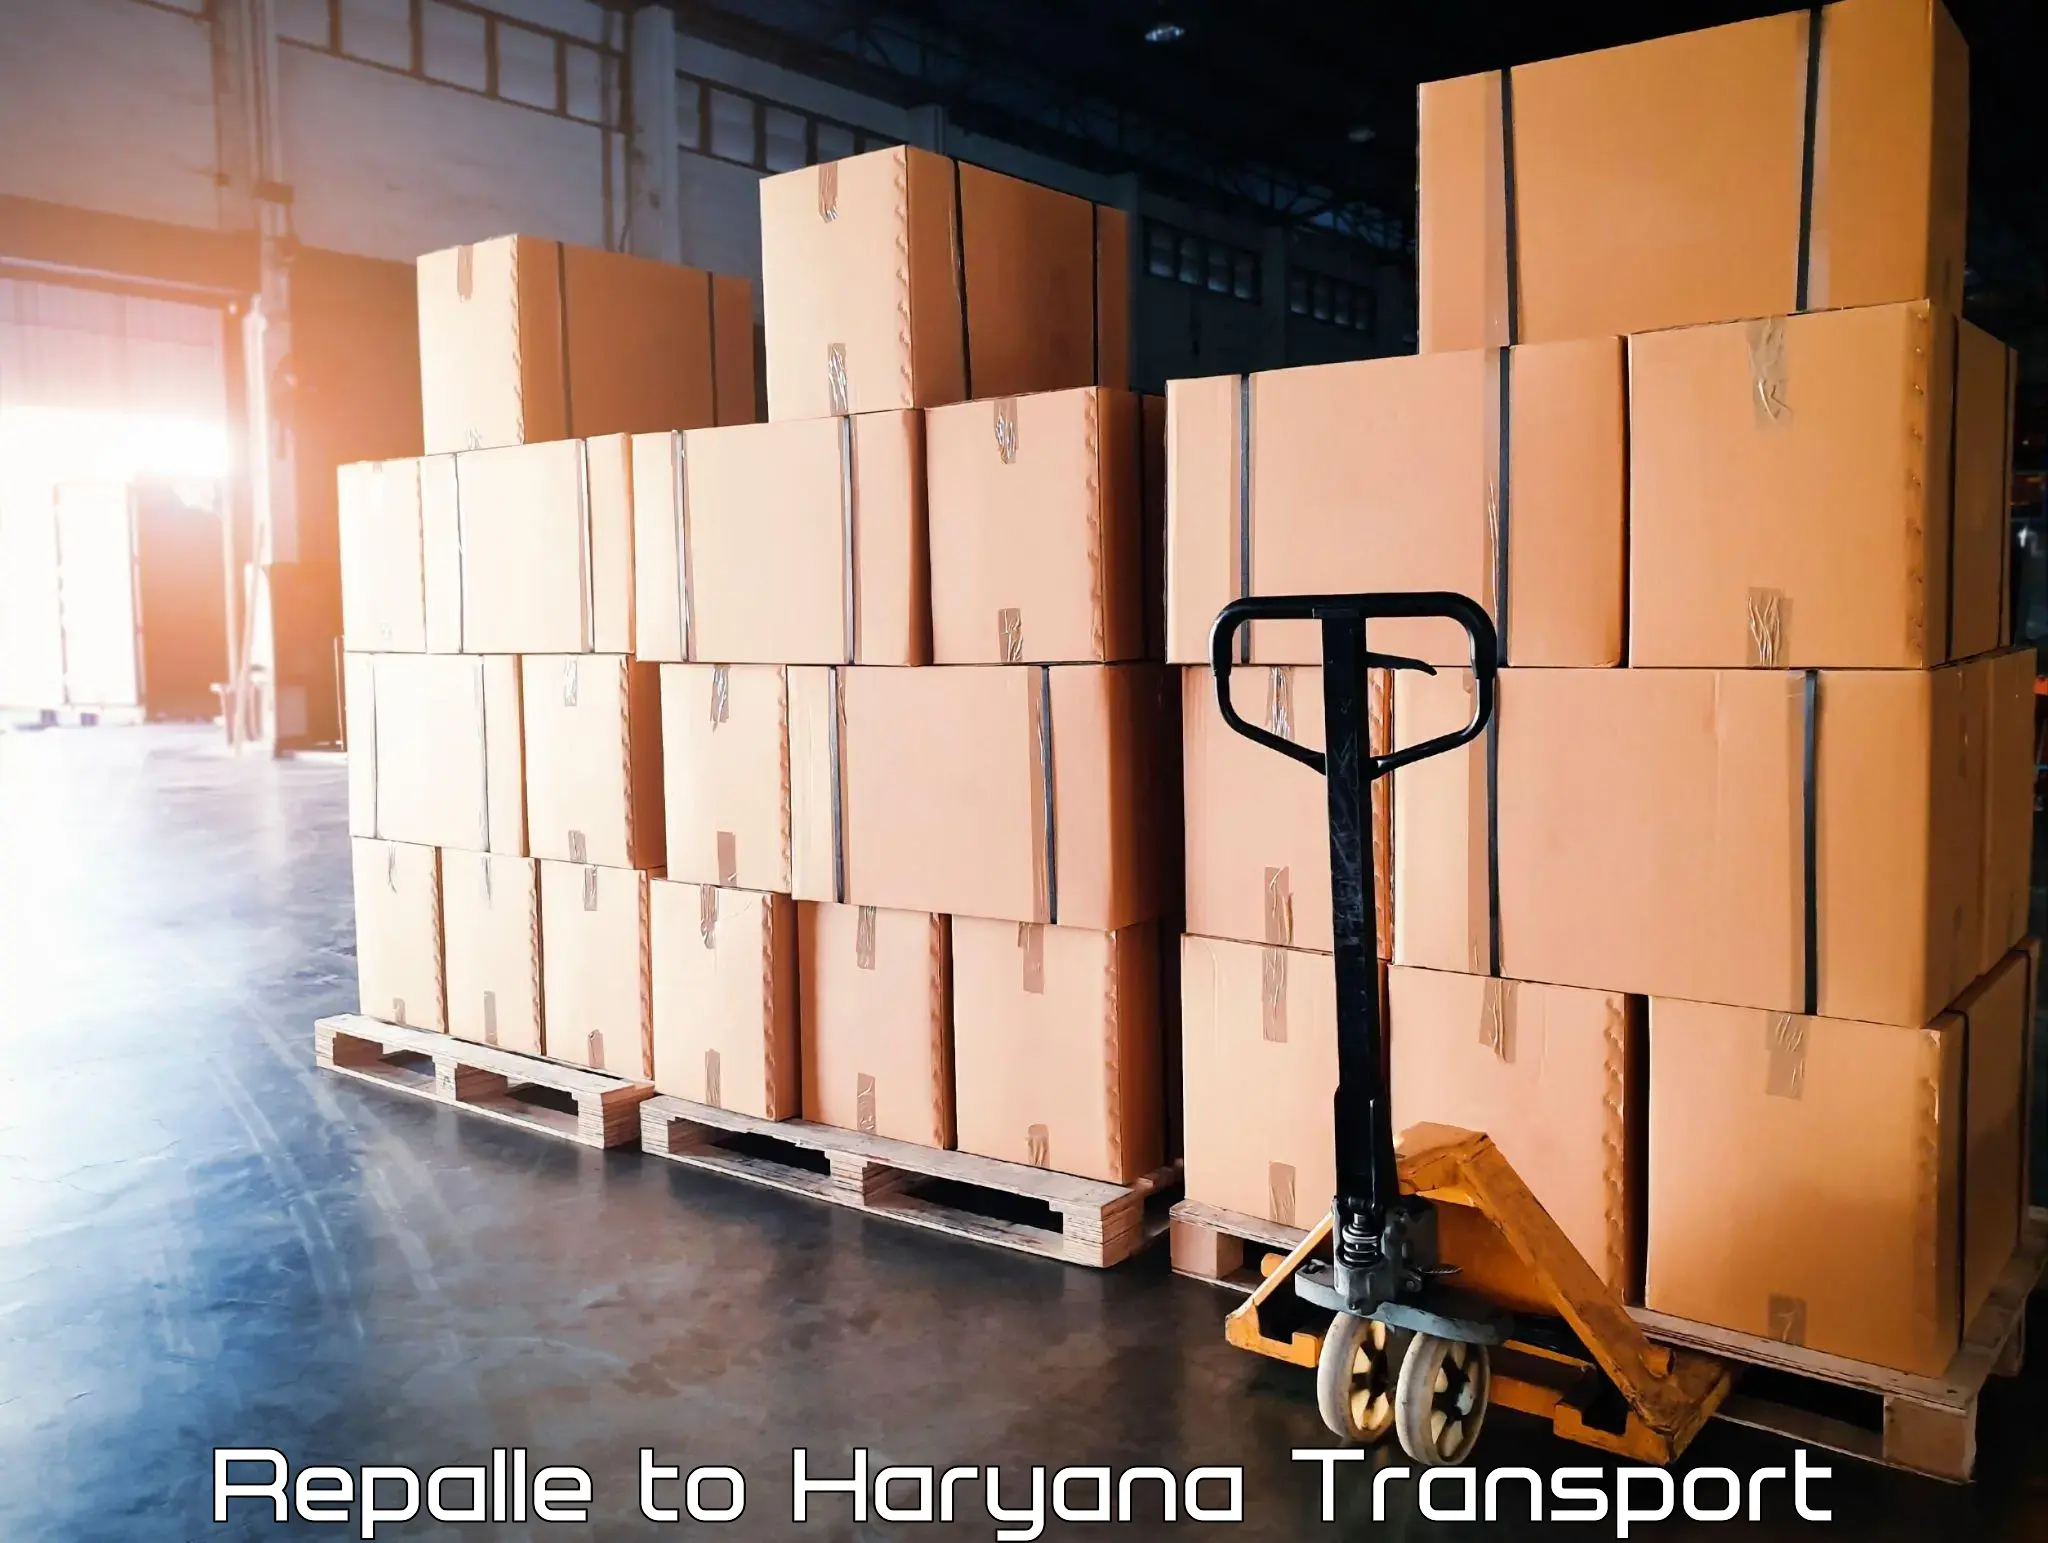 Commercial transport service Repalle to NCR Haryana